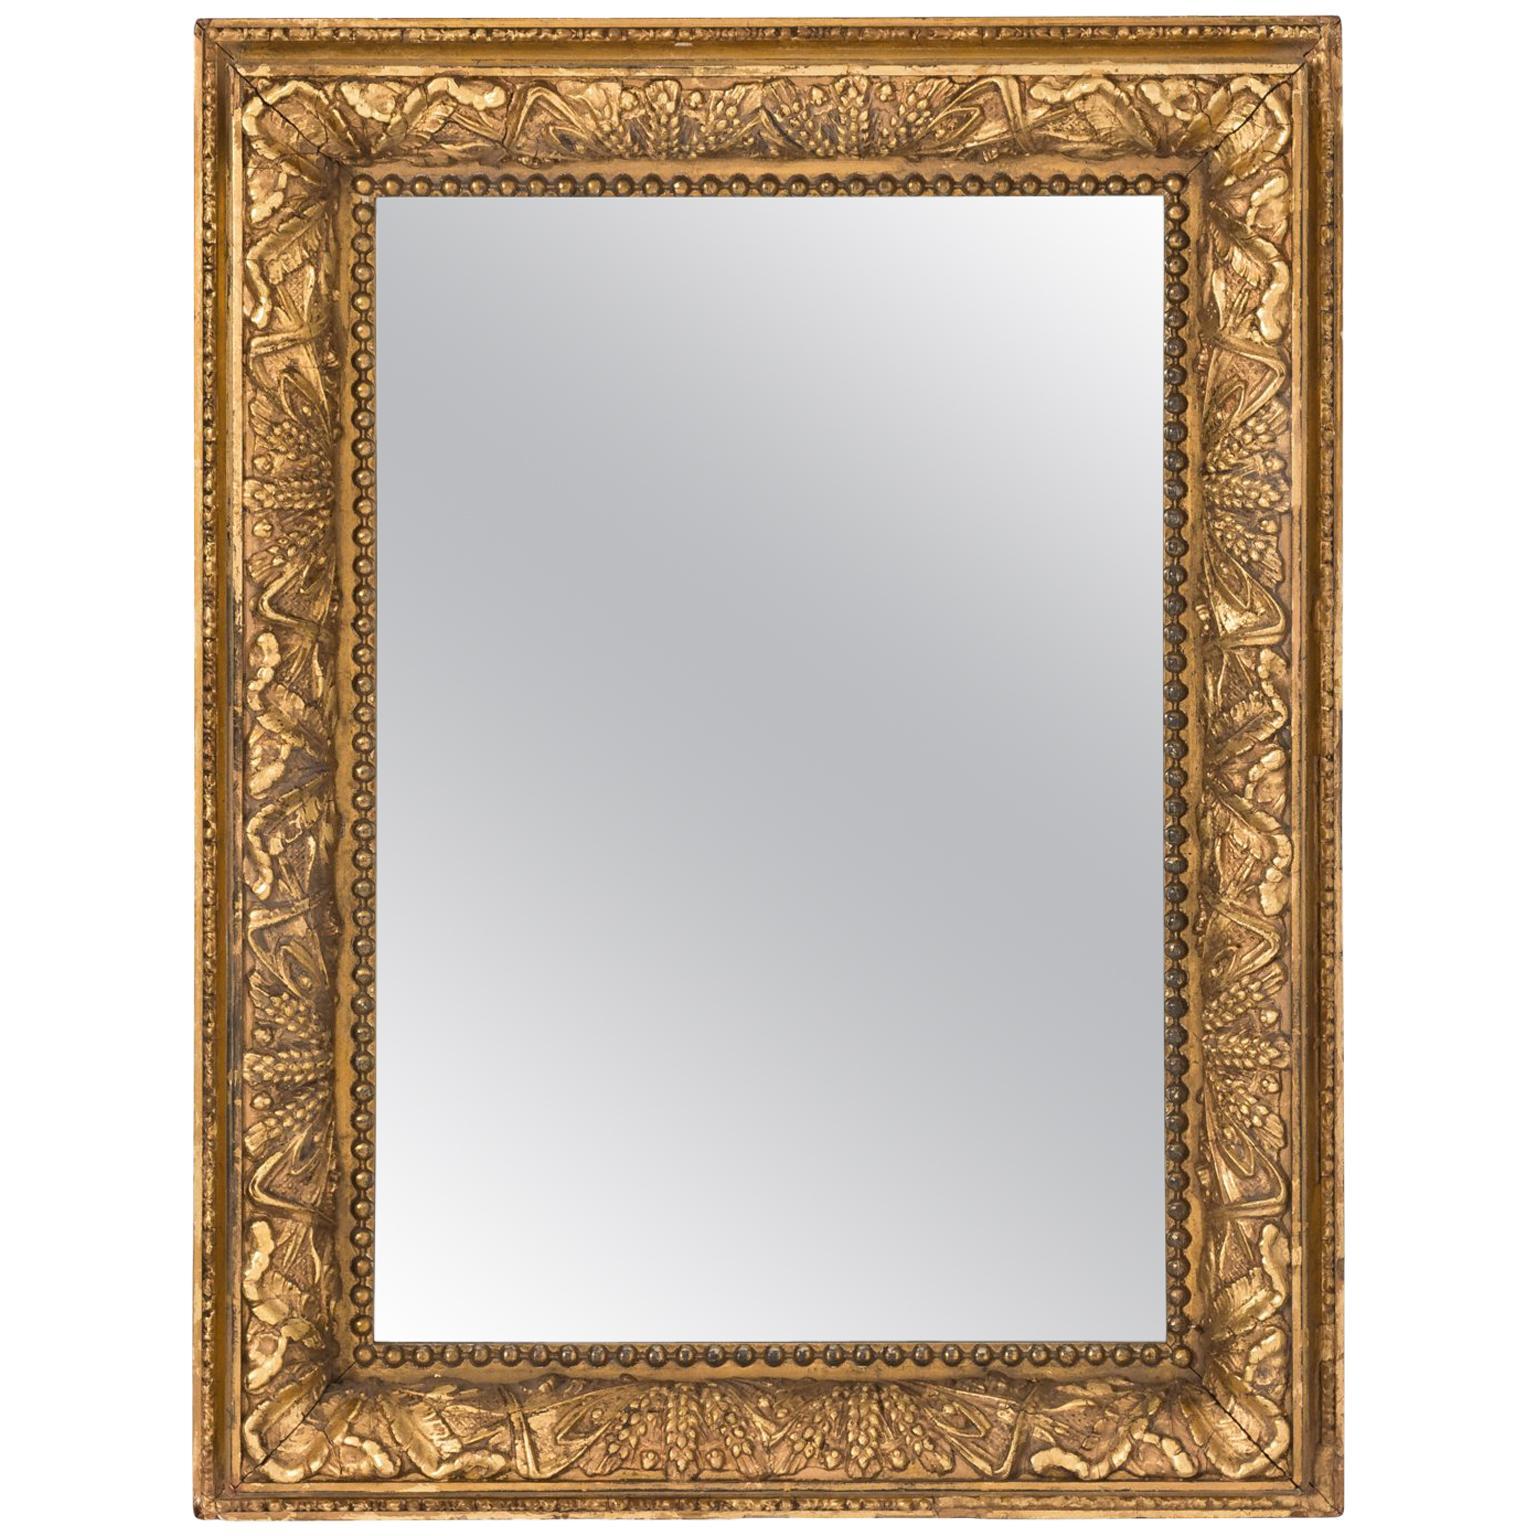 Late 19th Century American Mirror in a Gilded Frame